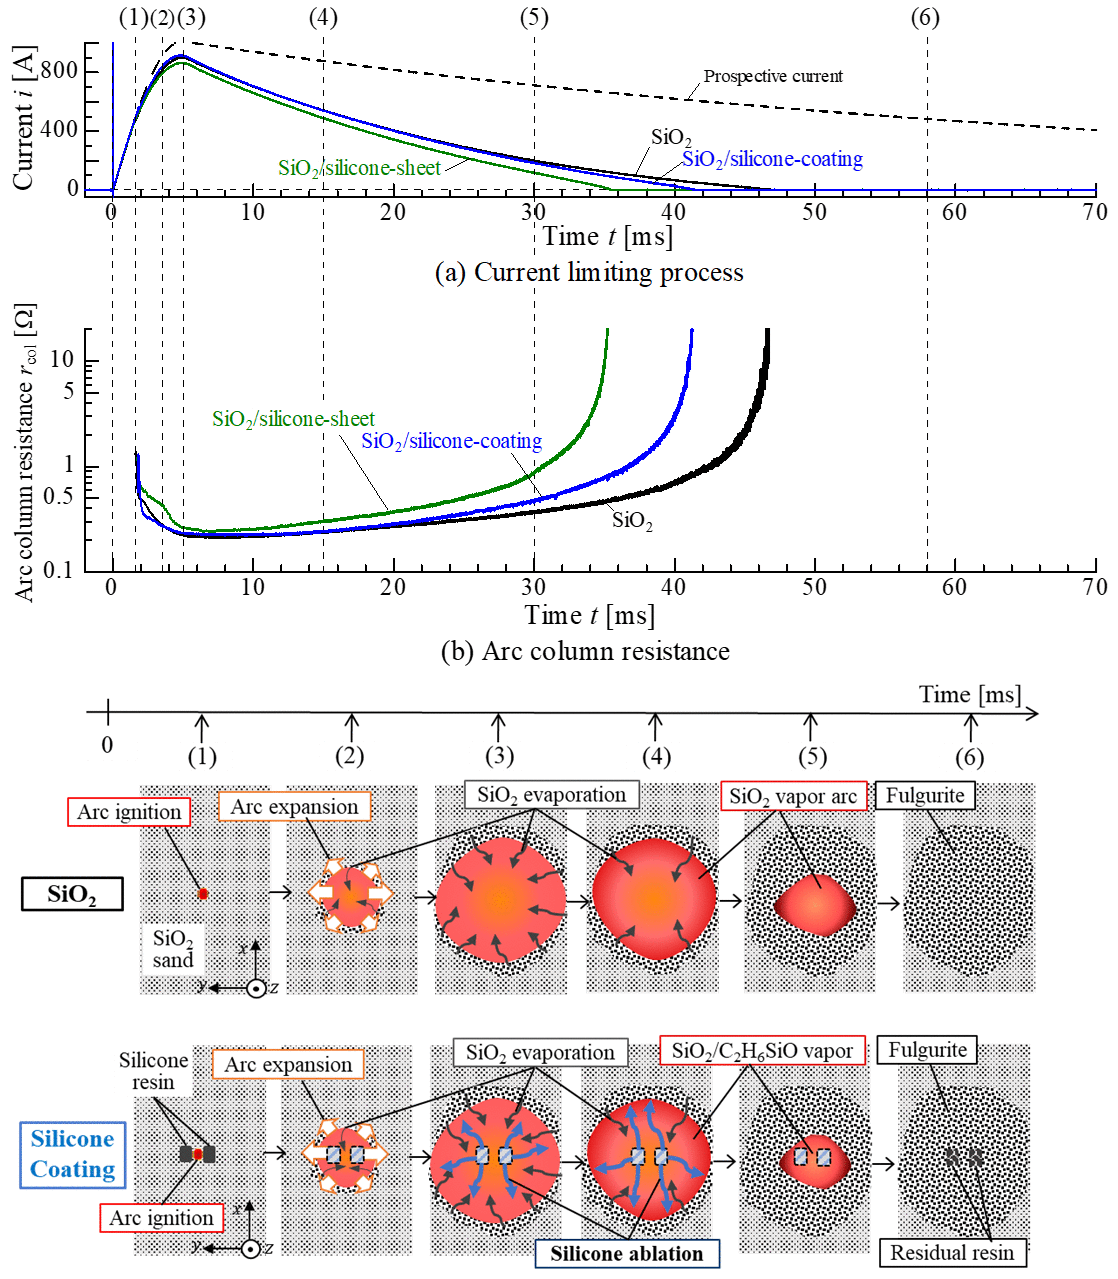 Top: Waveform of (a) current limiting process and (b) transient arc column resistance for an arc quenching medium of SiO2/silicone-polymer. Bottom: Schematic diagram of mechanisms underlying arc column resistance rise.